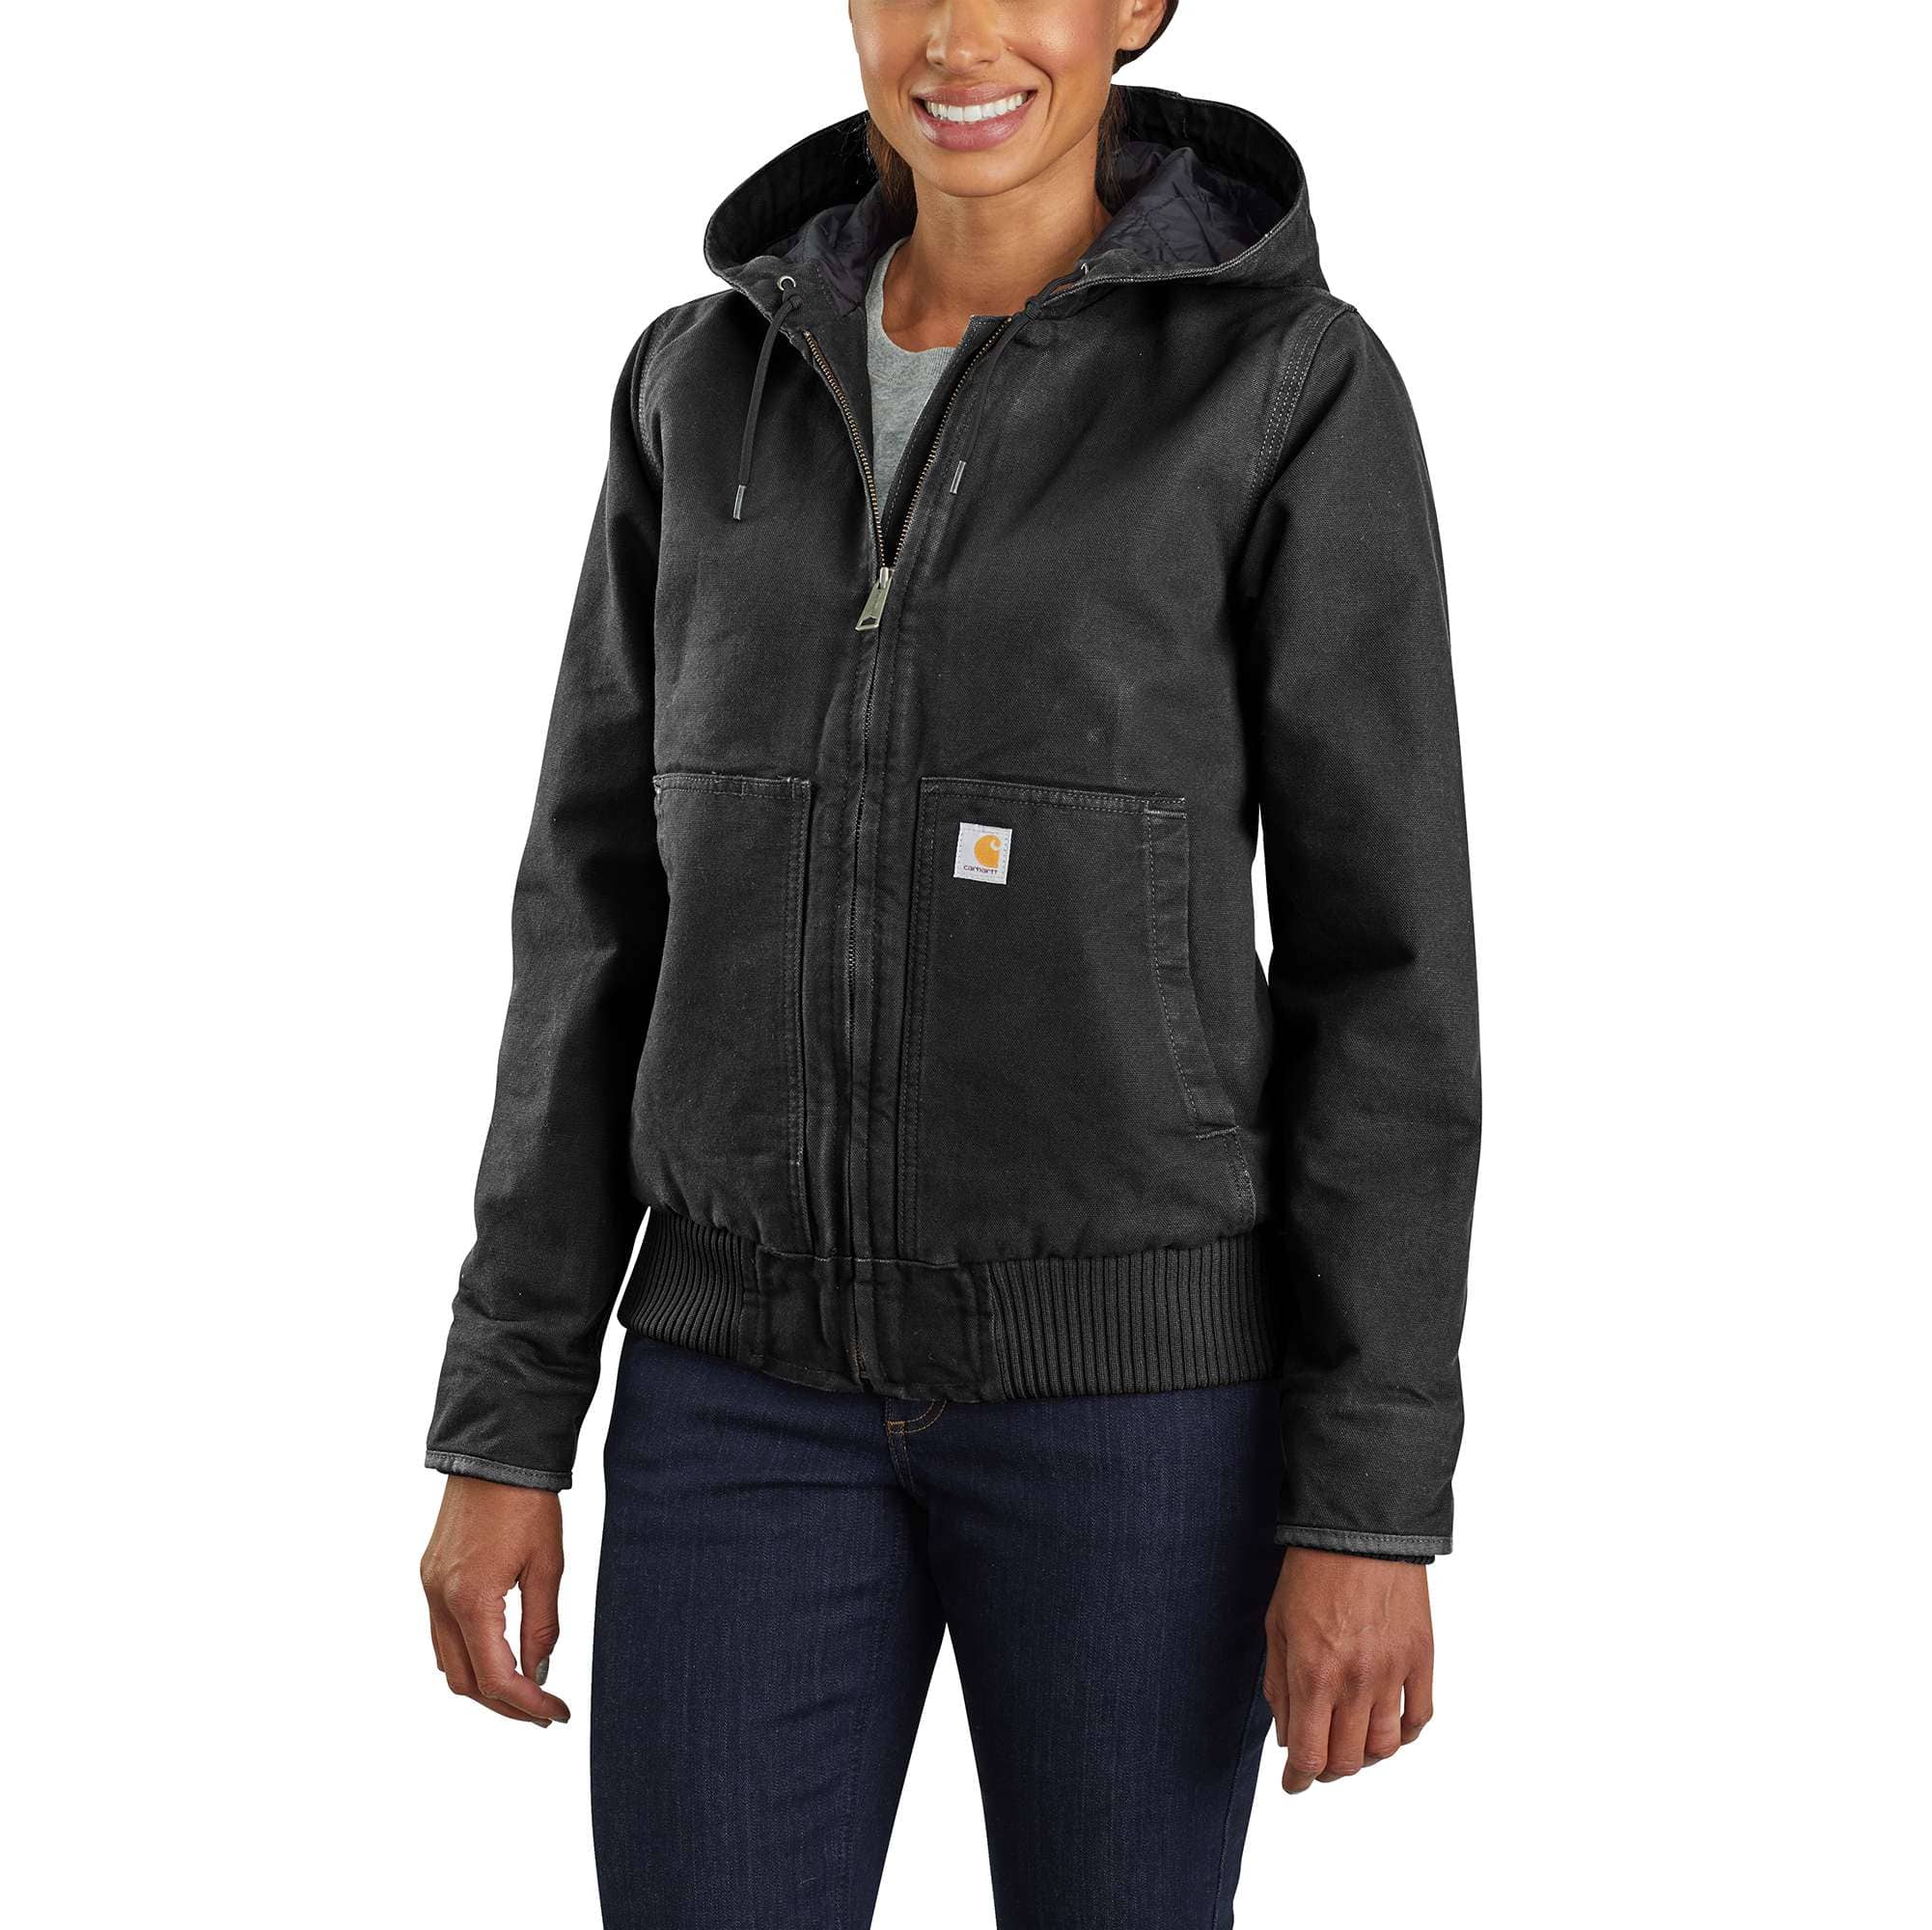 Carhartt Women's Washed Duck Insulated Active Jacket